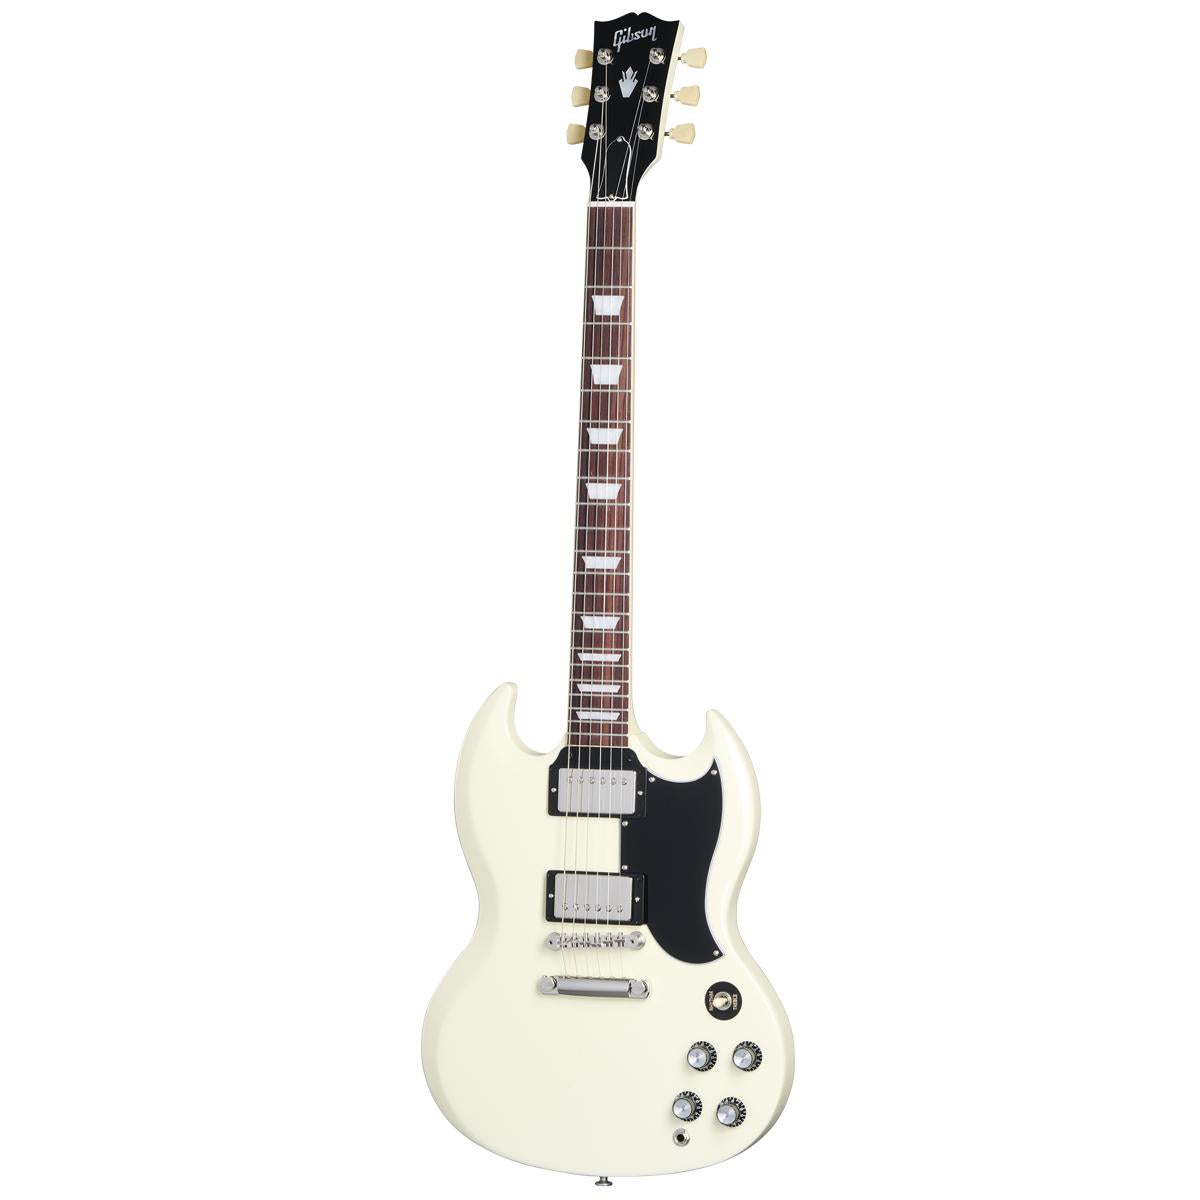 Gibson SG Standard 61 Electric Guitar Classic White w/ Hardcase - SG6100CWNH1